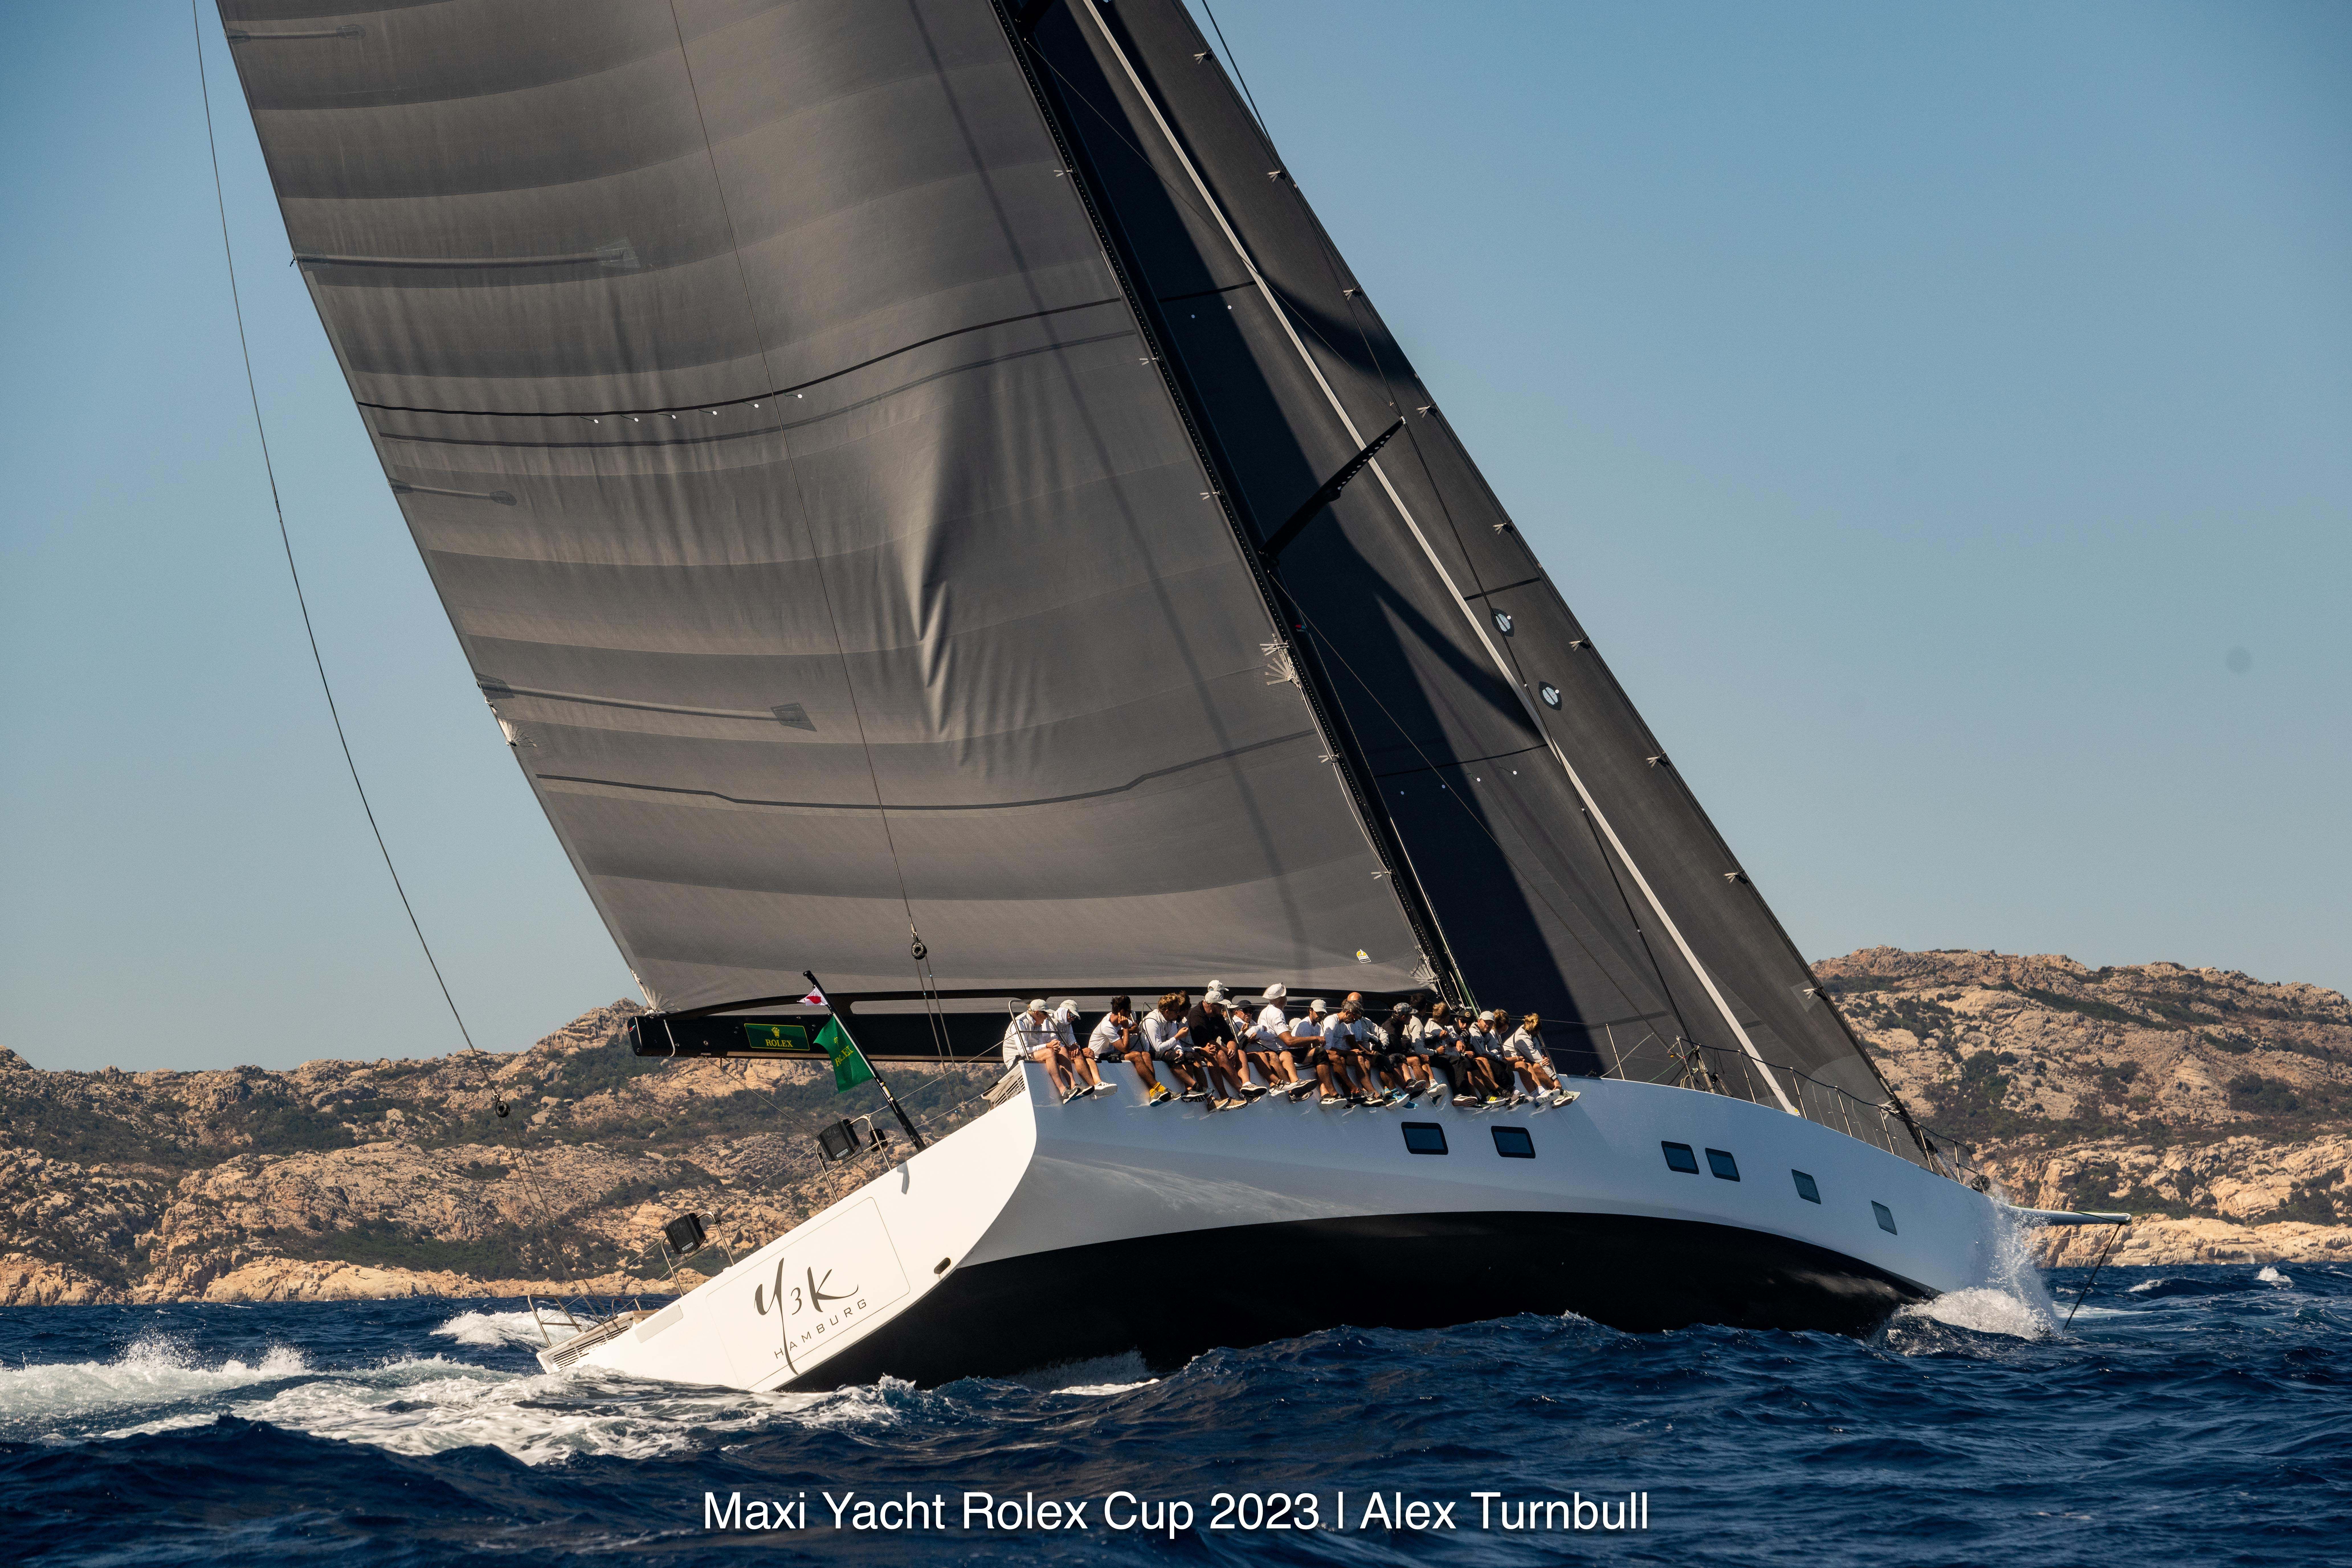 Claus-Peter Offen's Y3K, Maxi Yacht Rolex Cup 2023. Photo credit: © Alex Turnbull